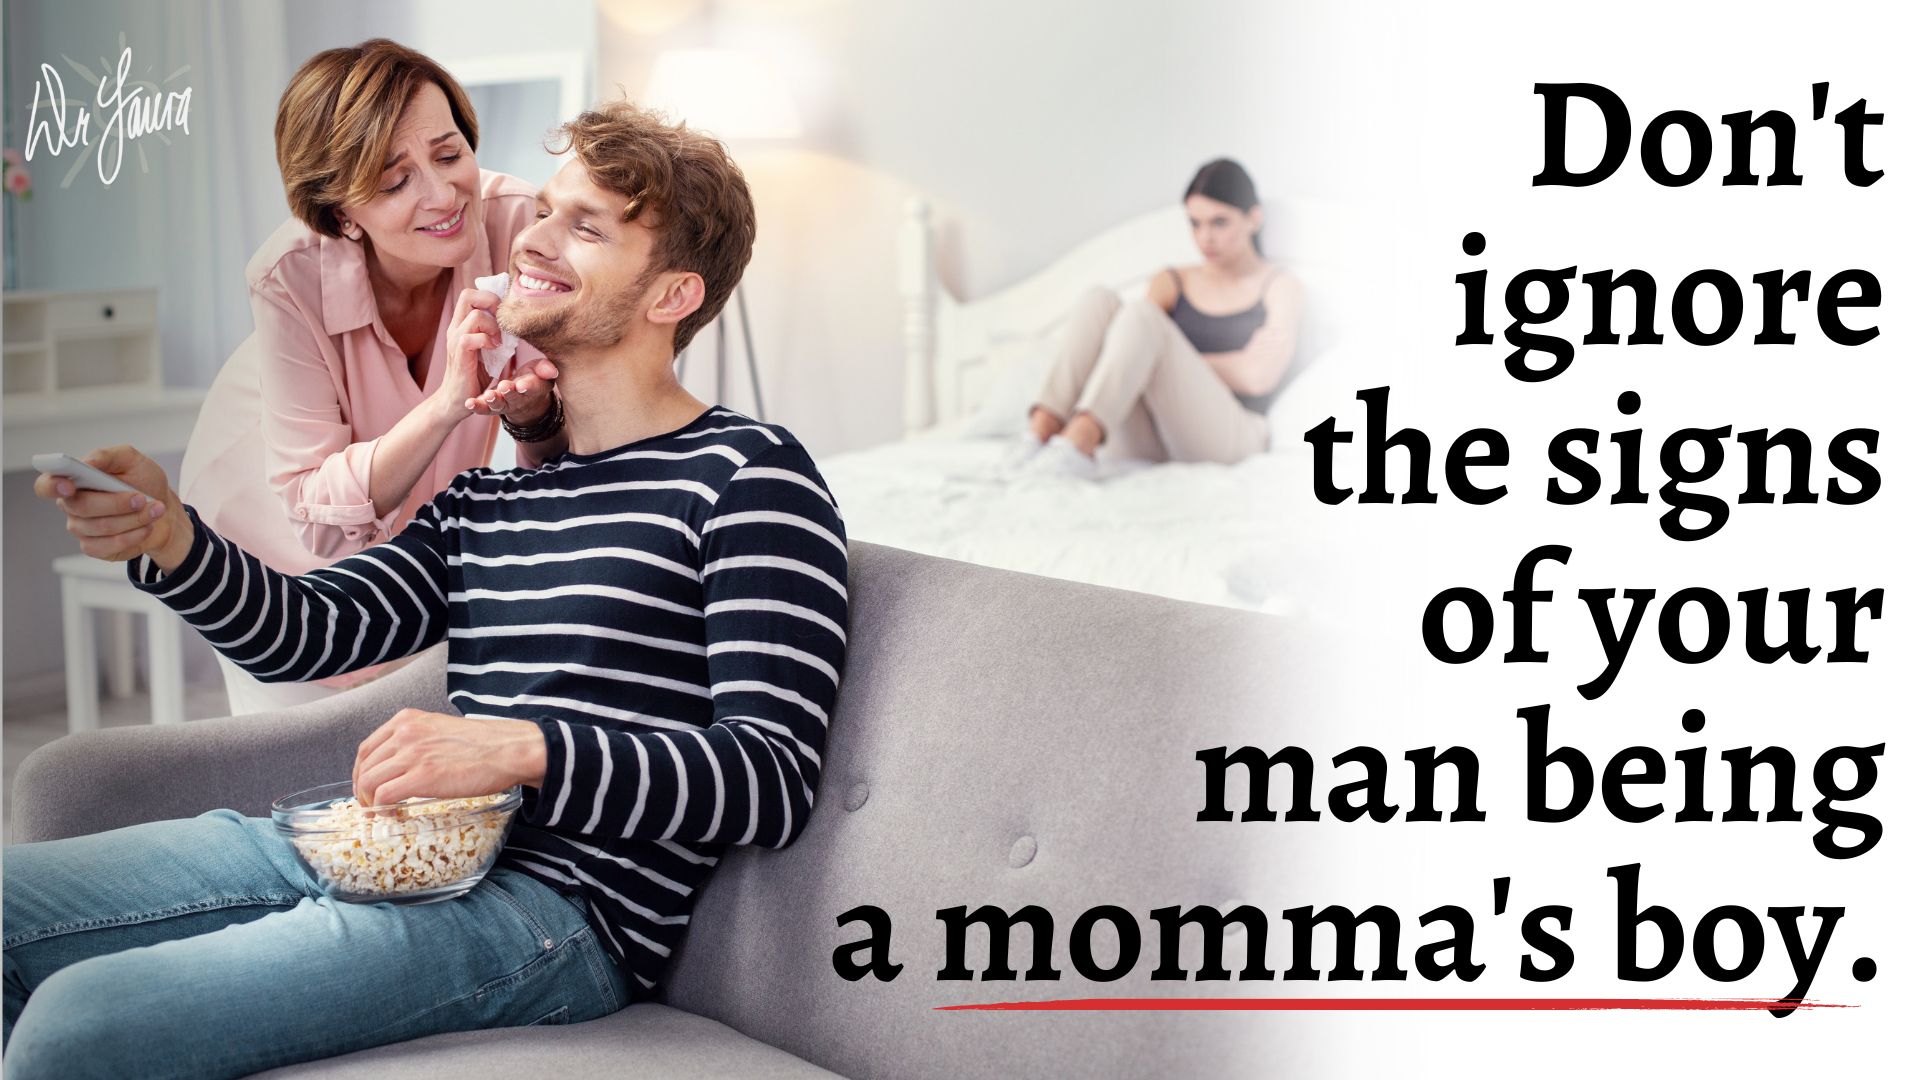 Blog: Are You Committing to a Momma's Boy?